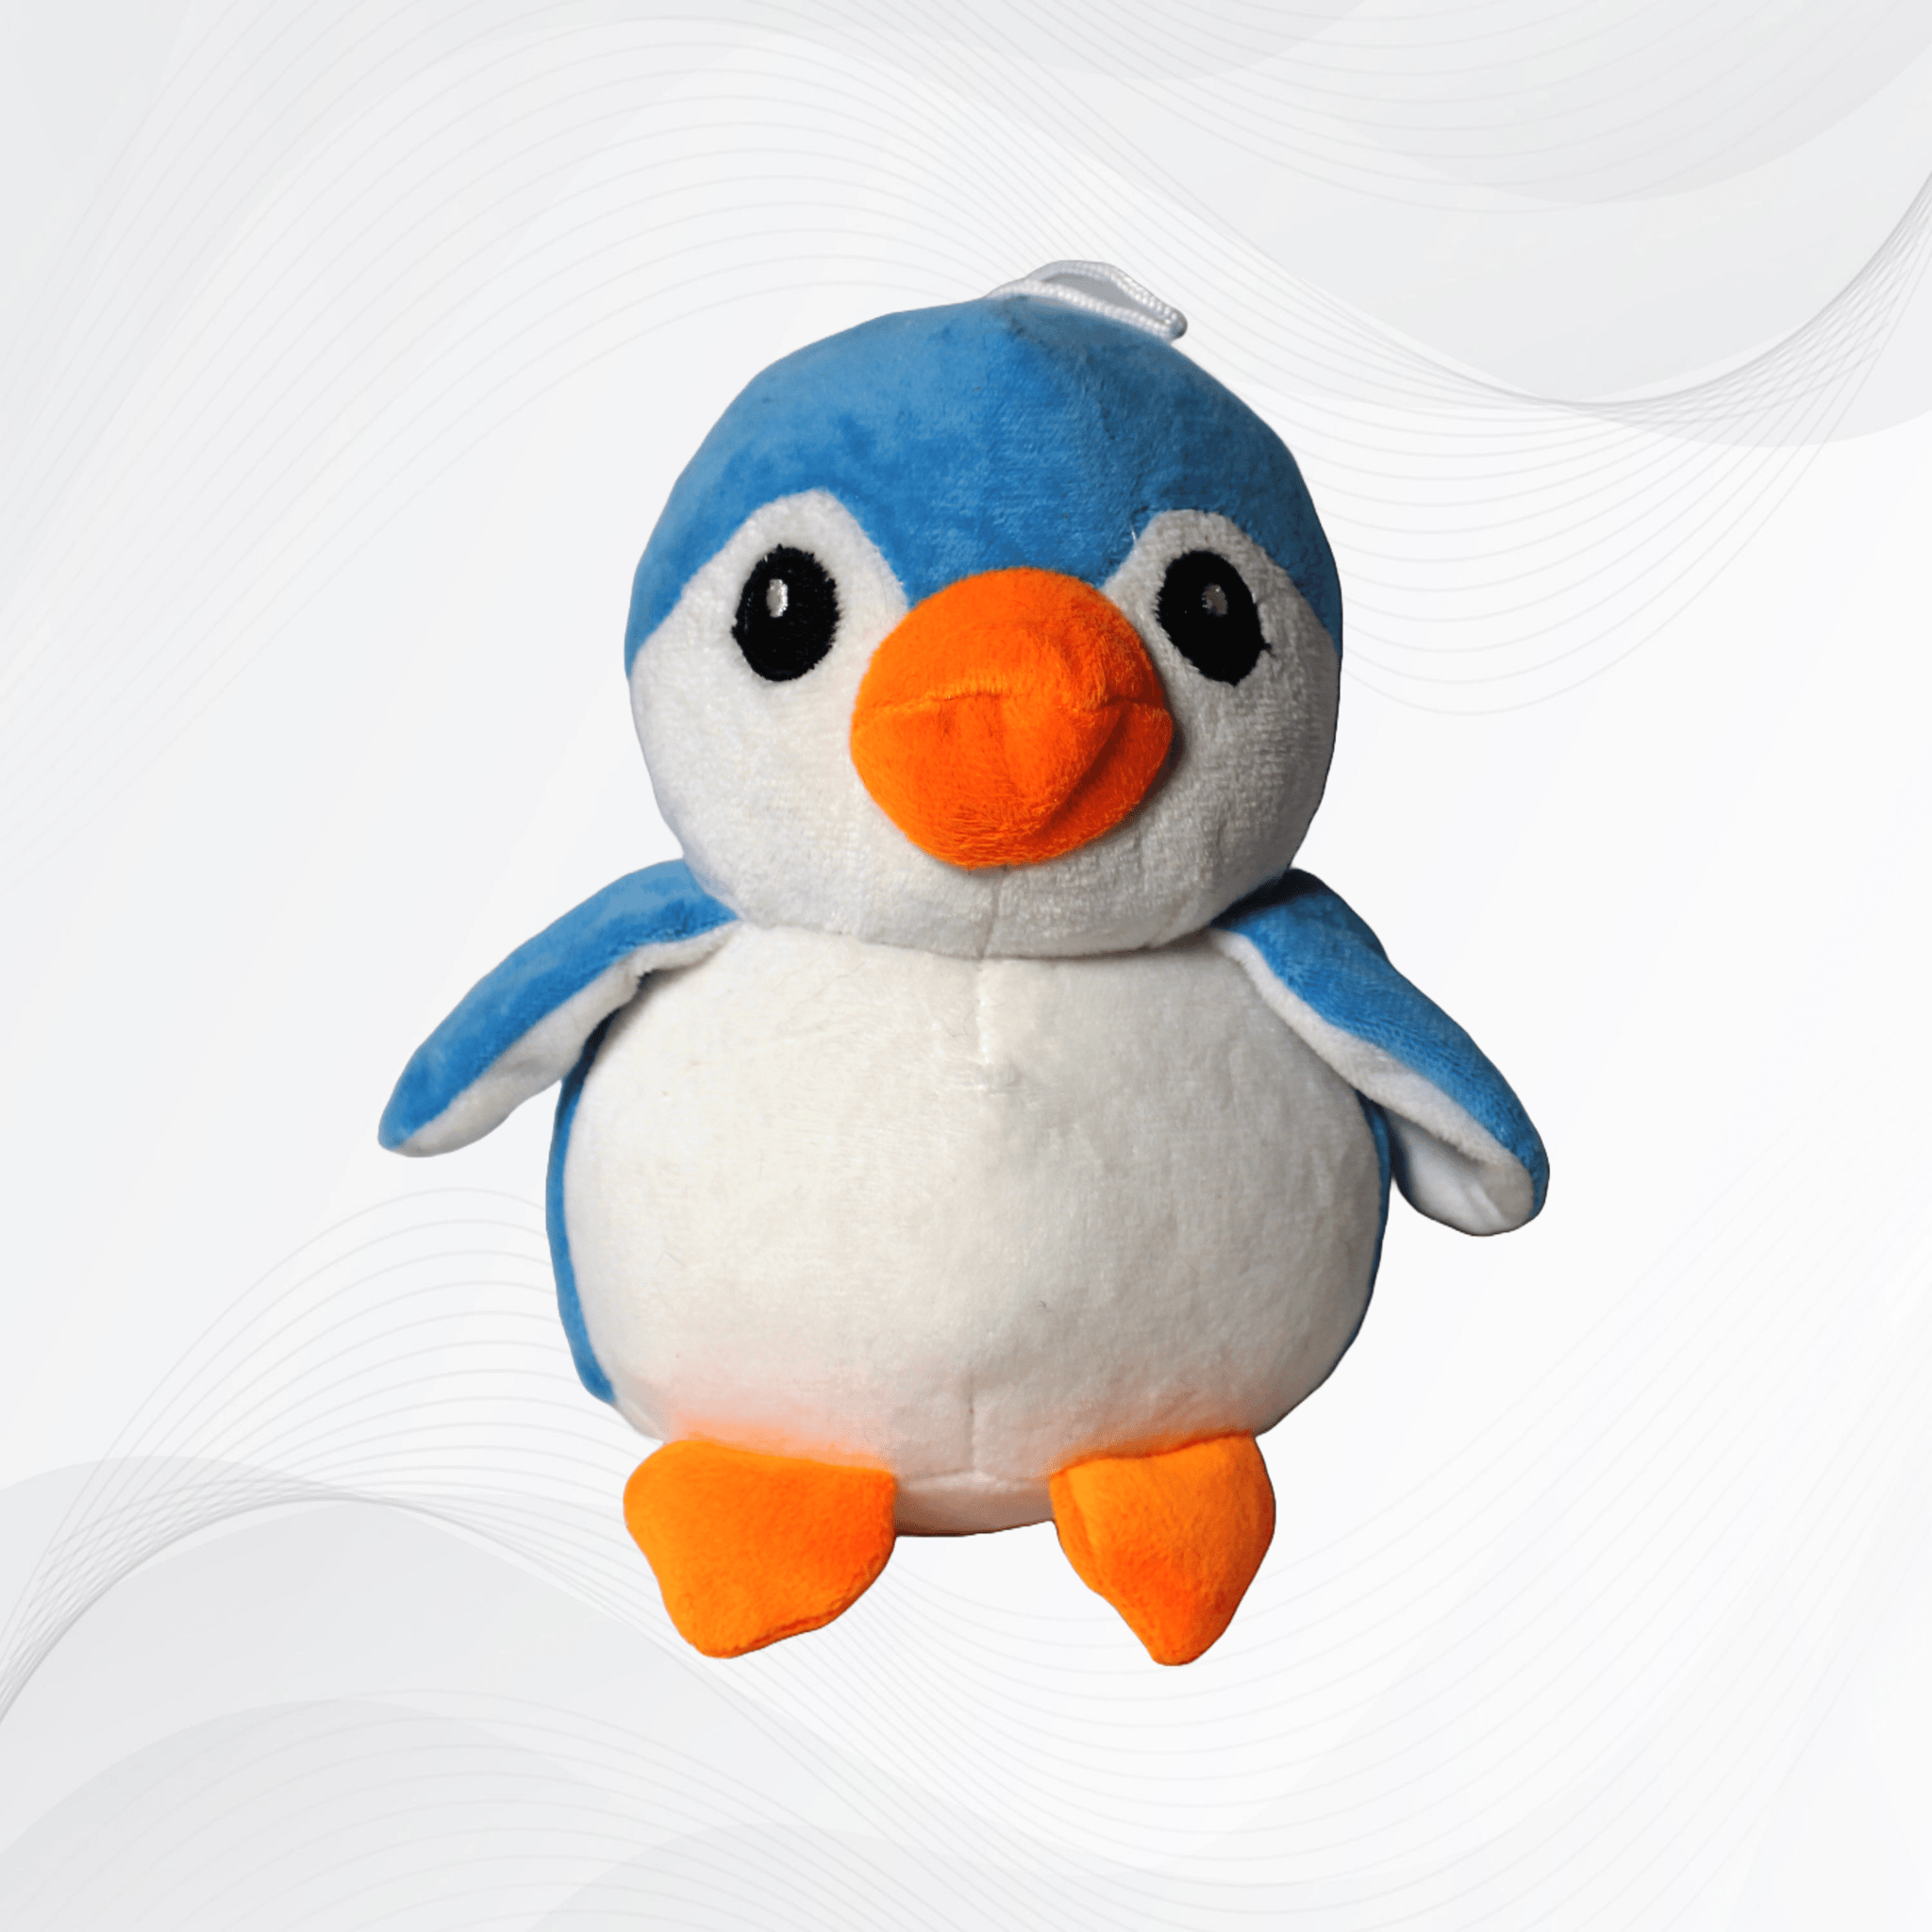 DyneJoy Penguin Animal Stuffed Toy - Soft Plush Toy for Kids - Washable - 18cm – Lightweight(Pack of 1)